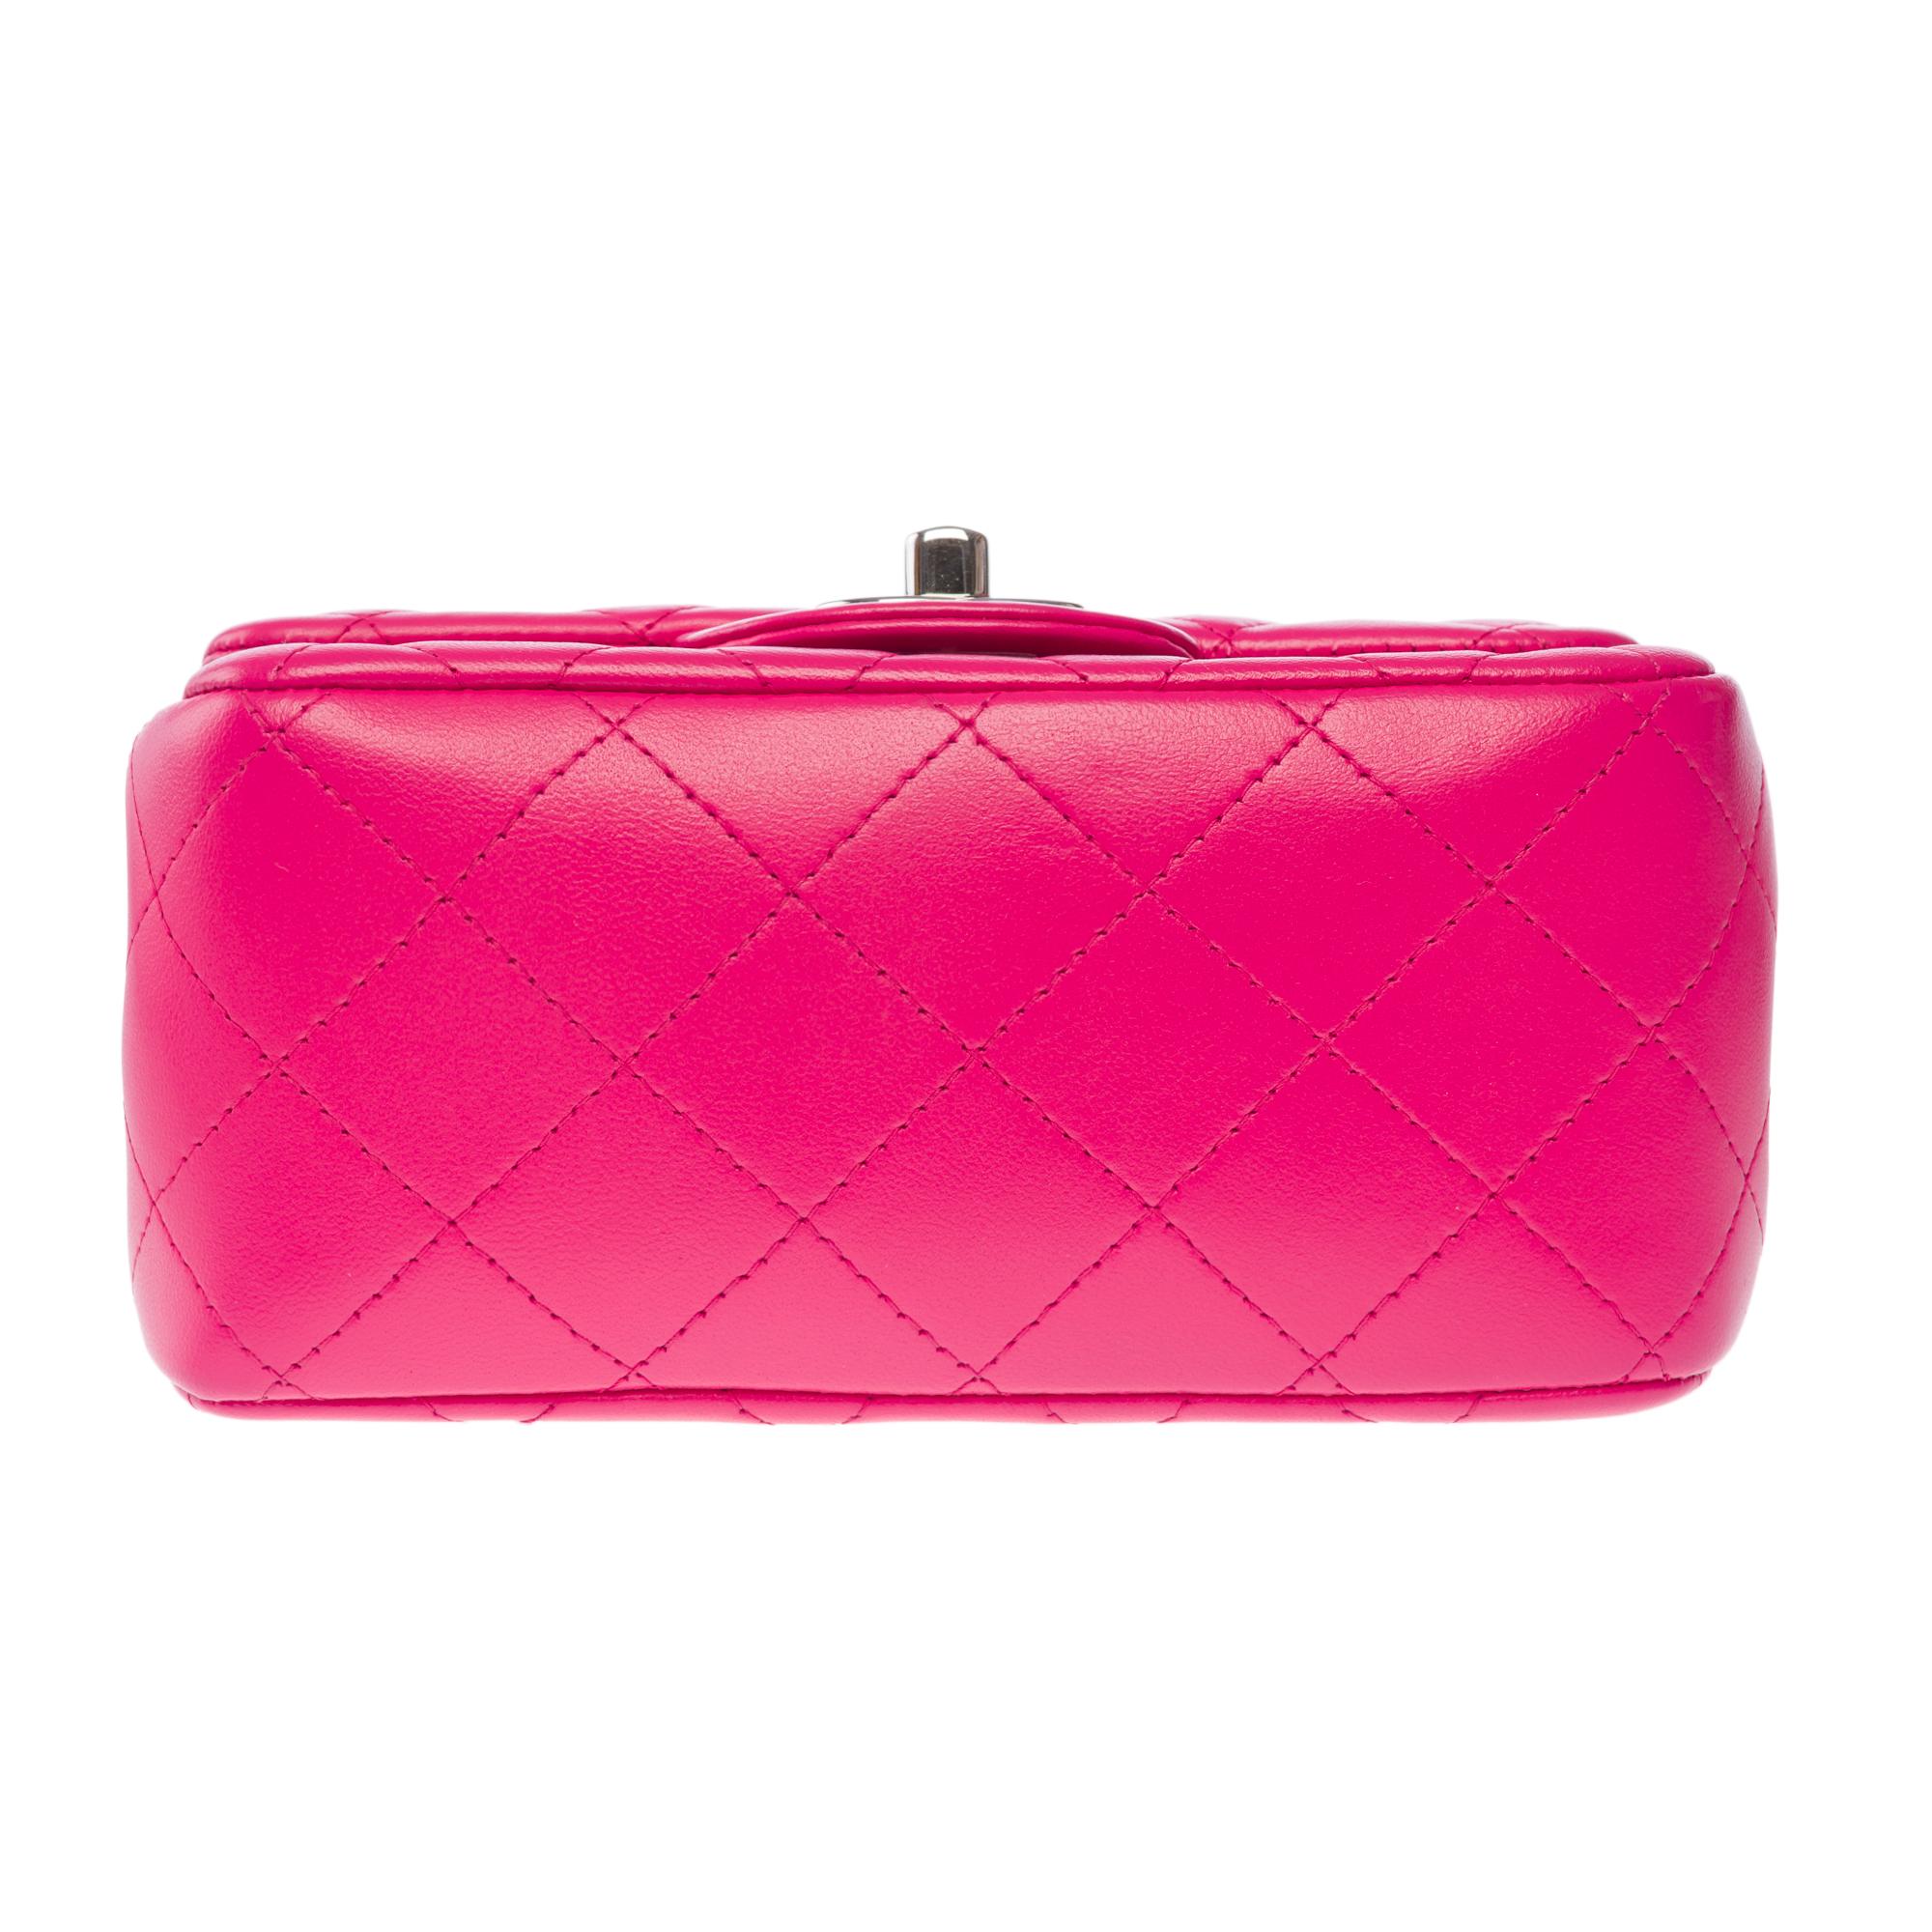 Gorgeous Chanel Mini Timeless Shoulder flap bag in Pink quilted leather, SHW For Sale 6